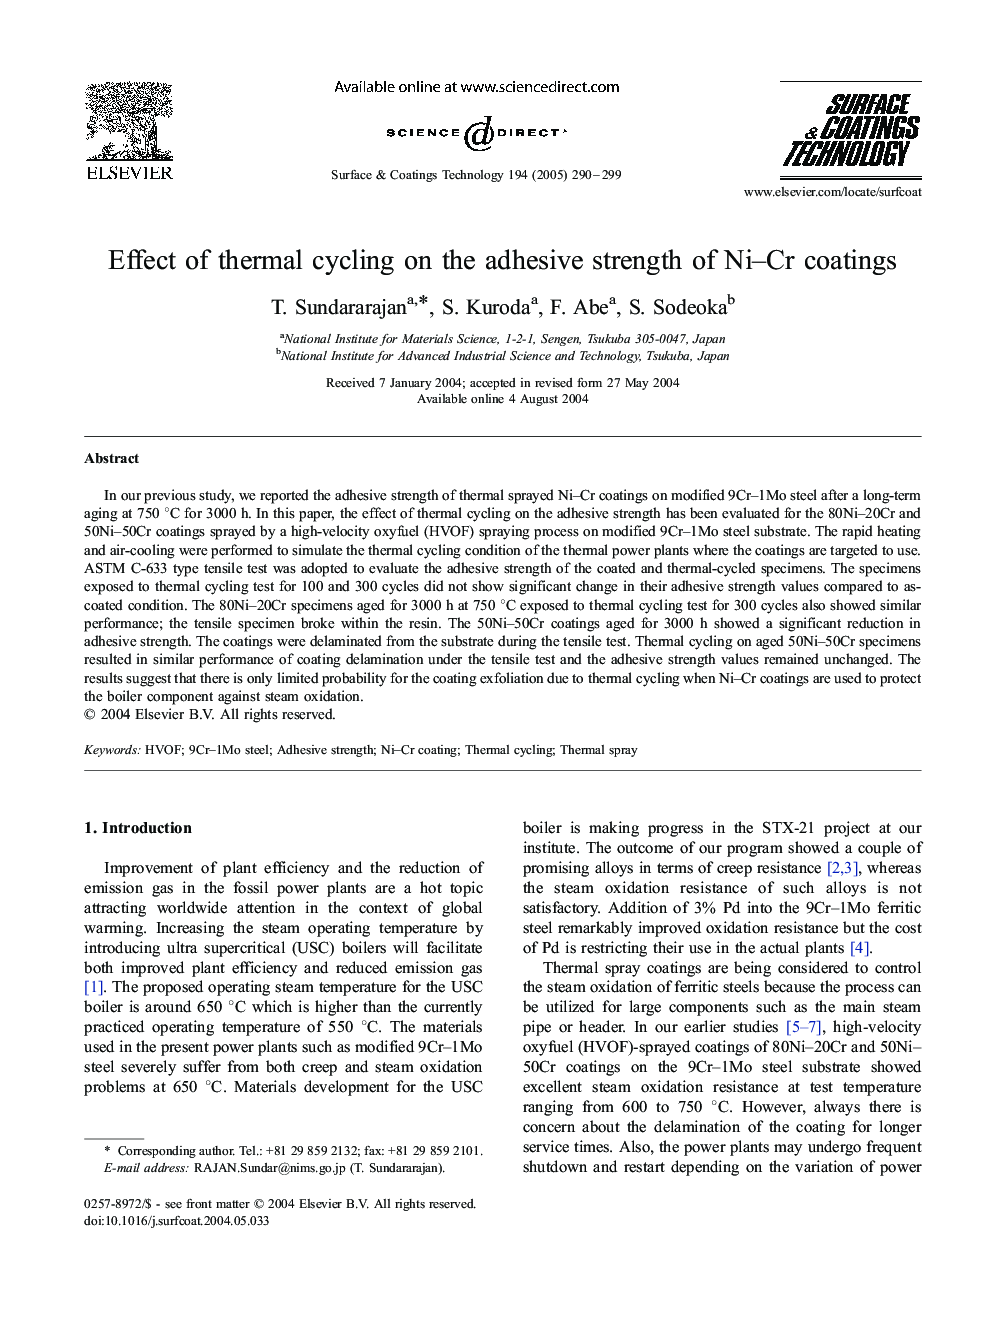 Effect of thermal cycling on the adhesive strength of Ni-Cr coatings